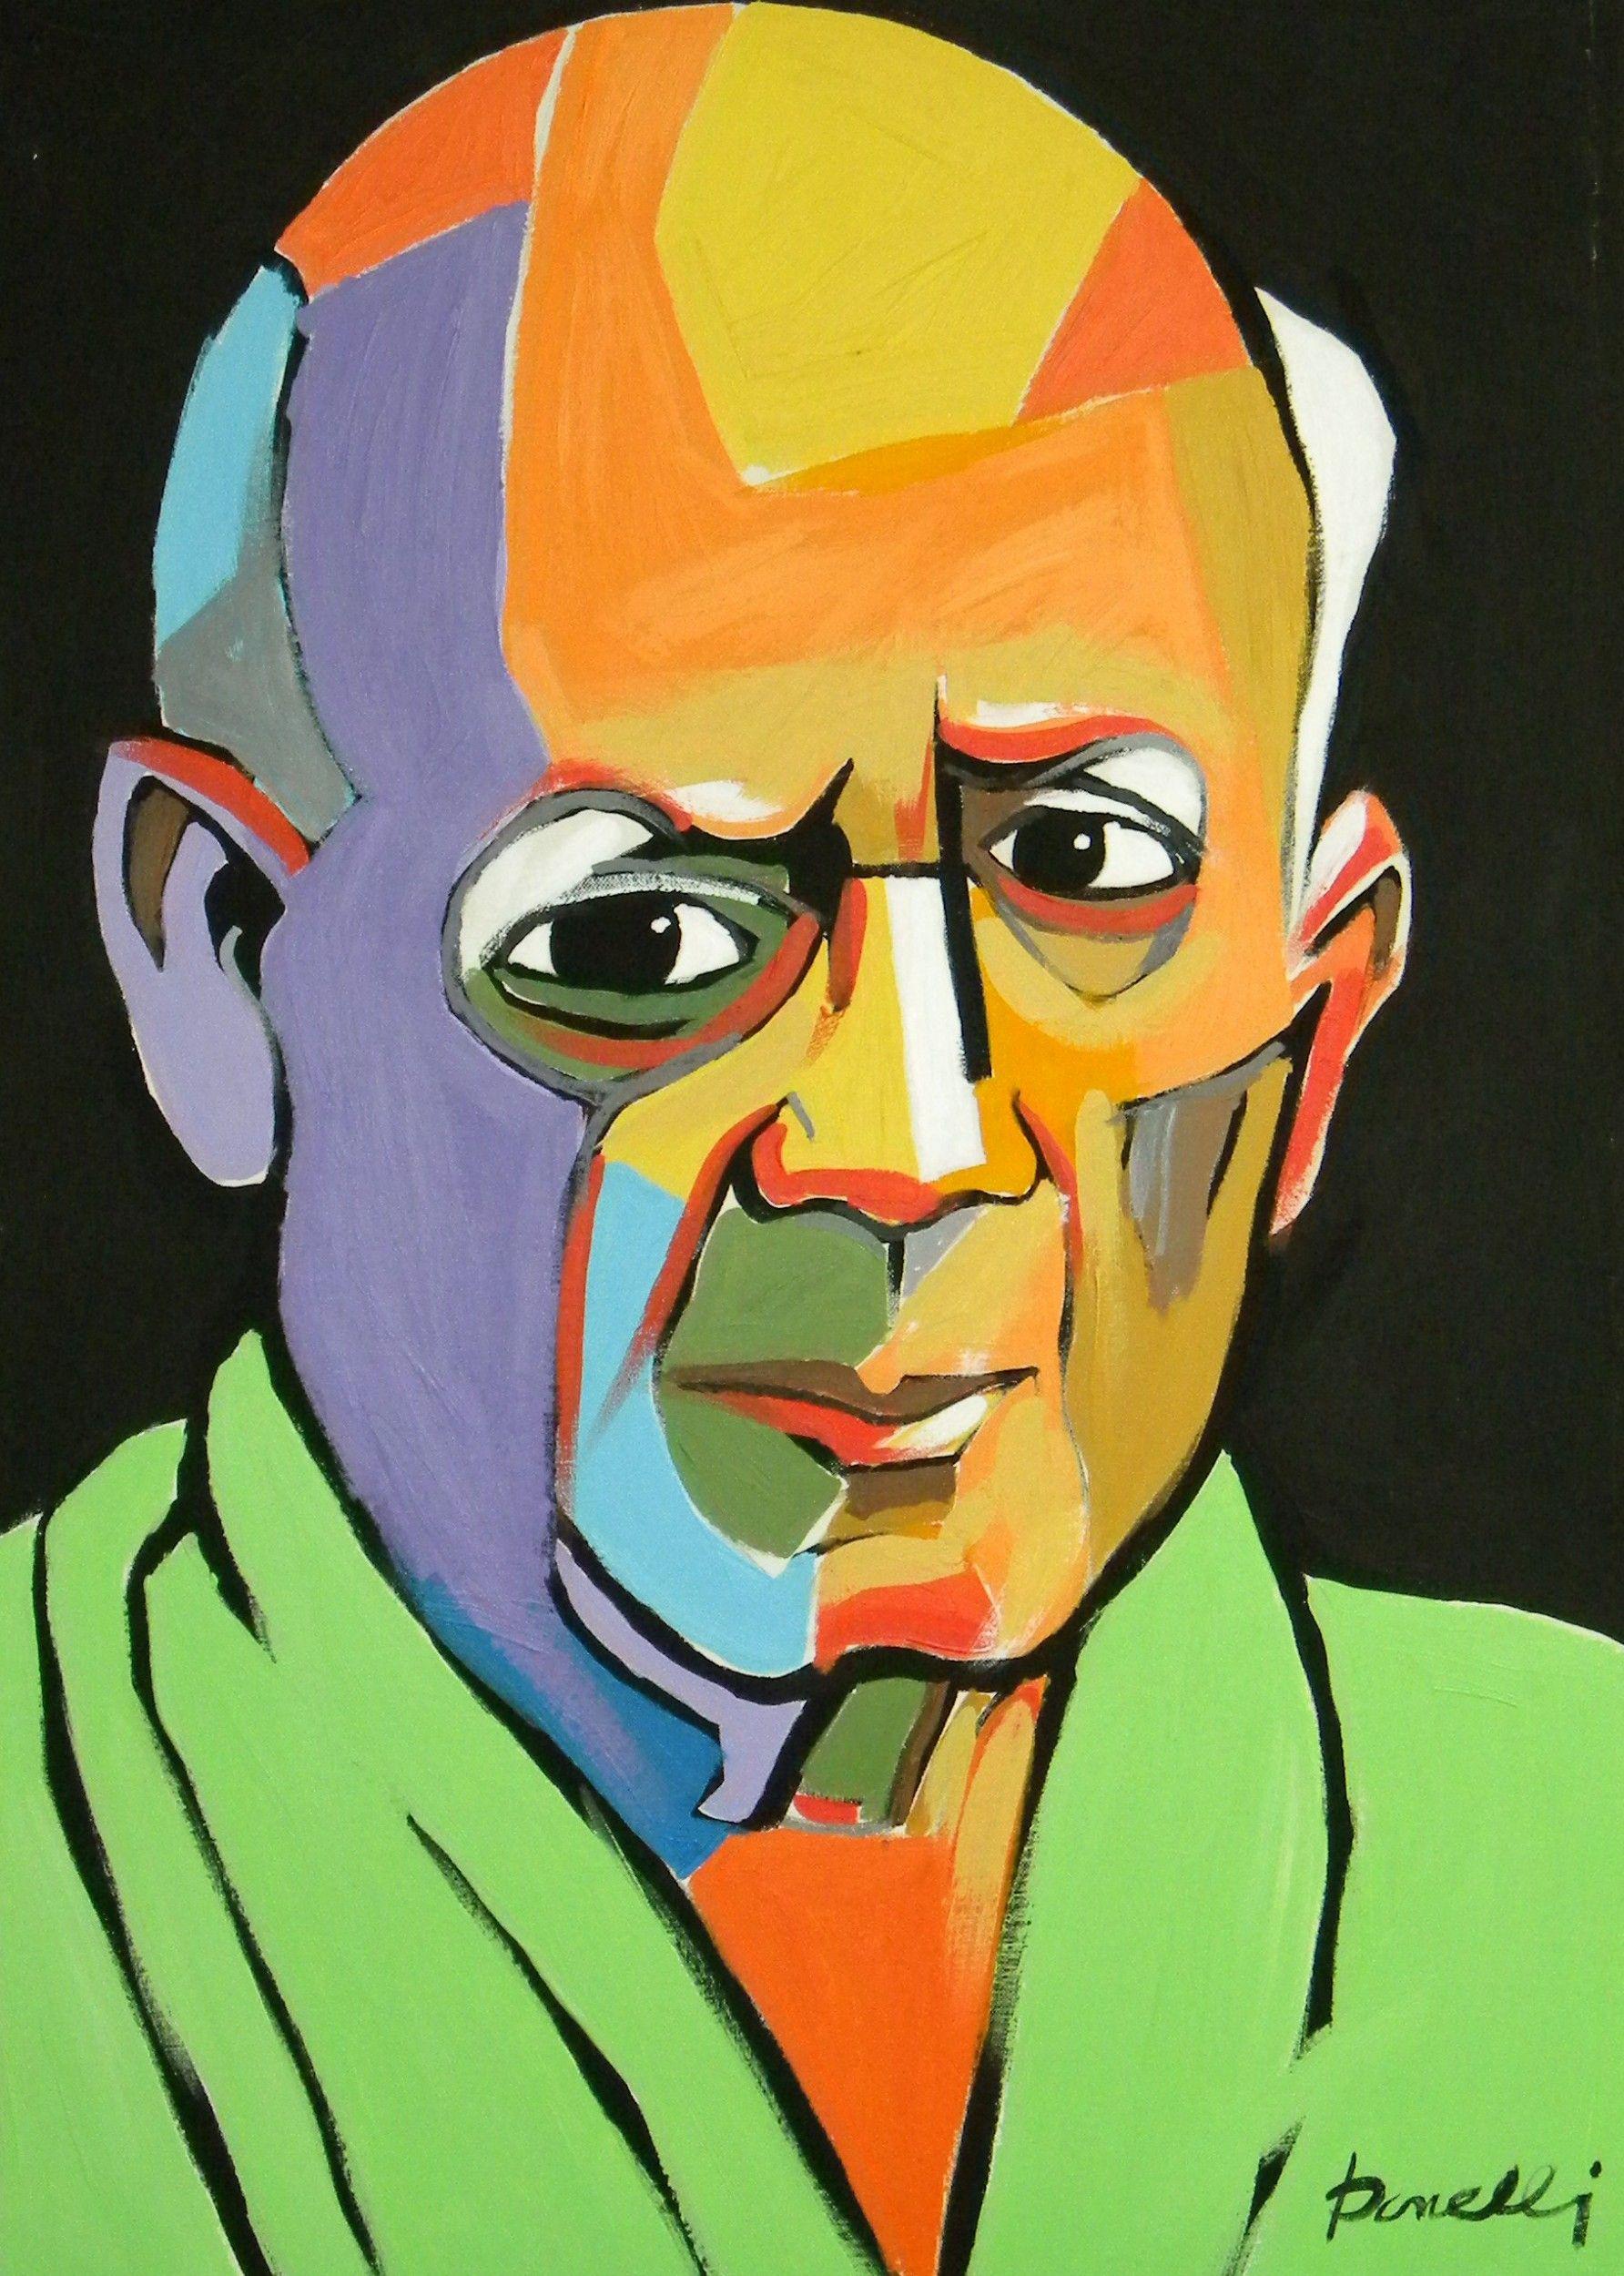 Pablo Picasso Artistic Wallpapers - Top Free Pablo Picasso Artistic ...